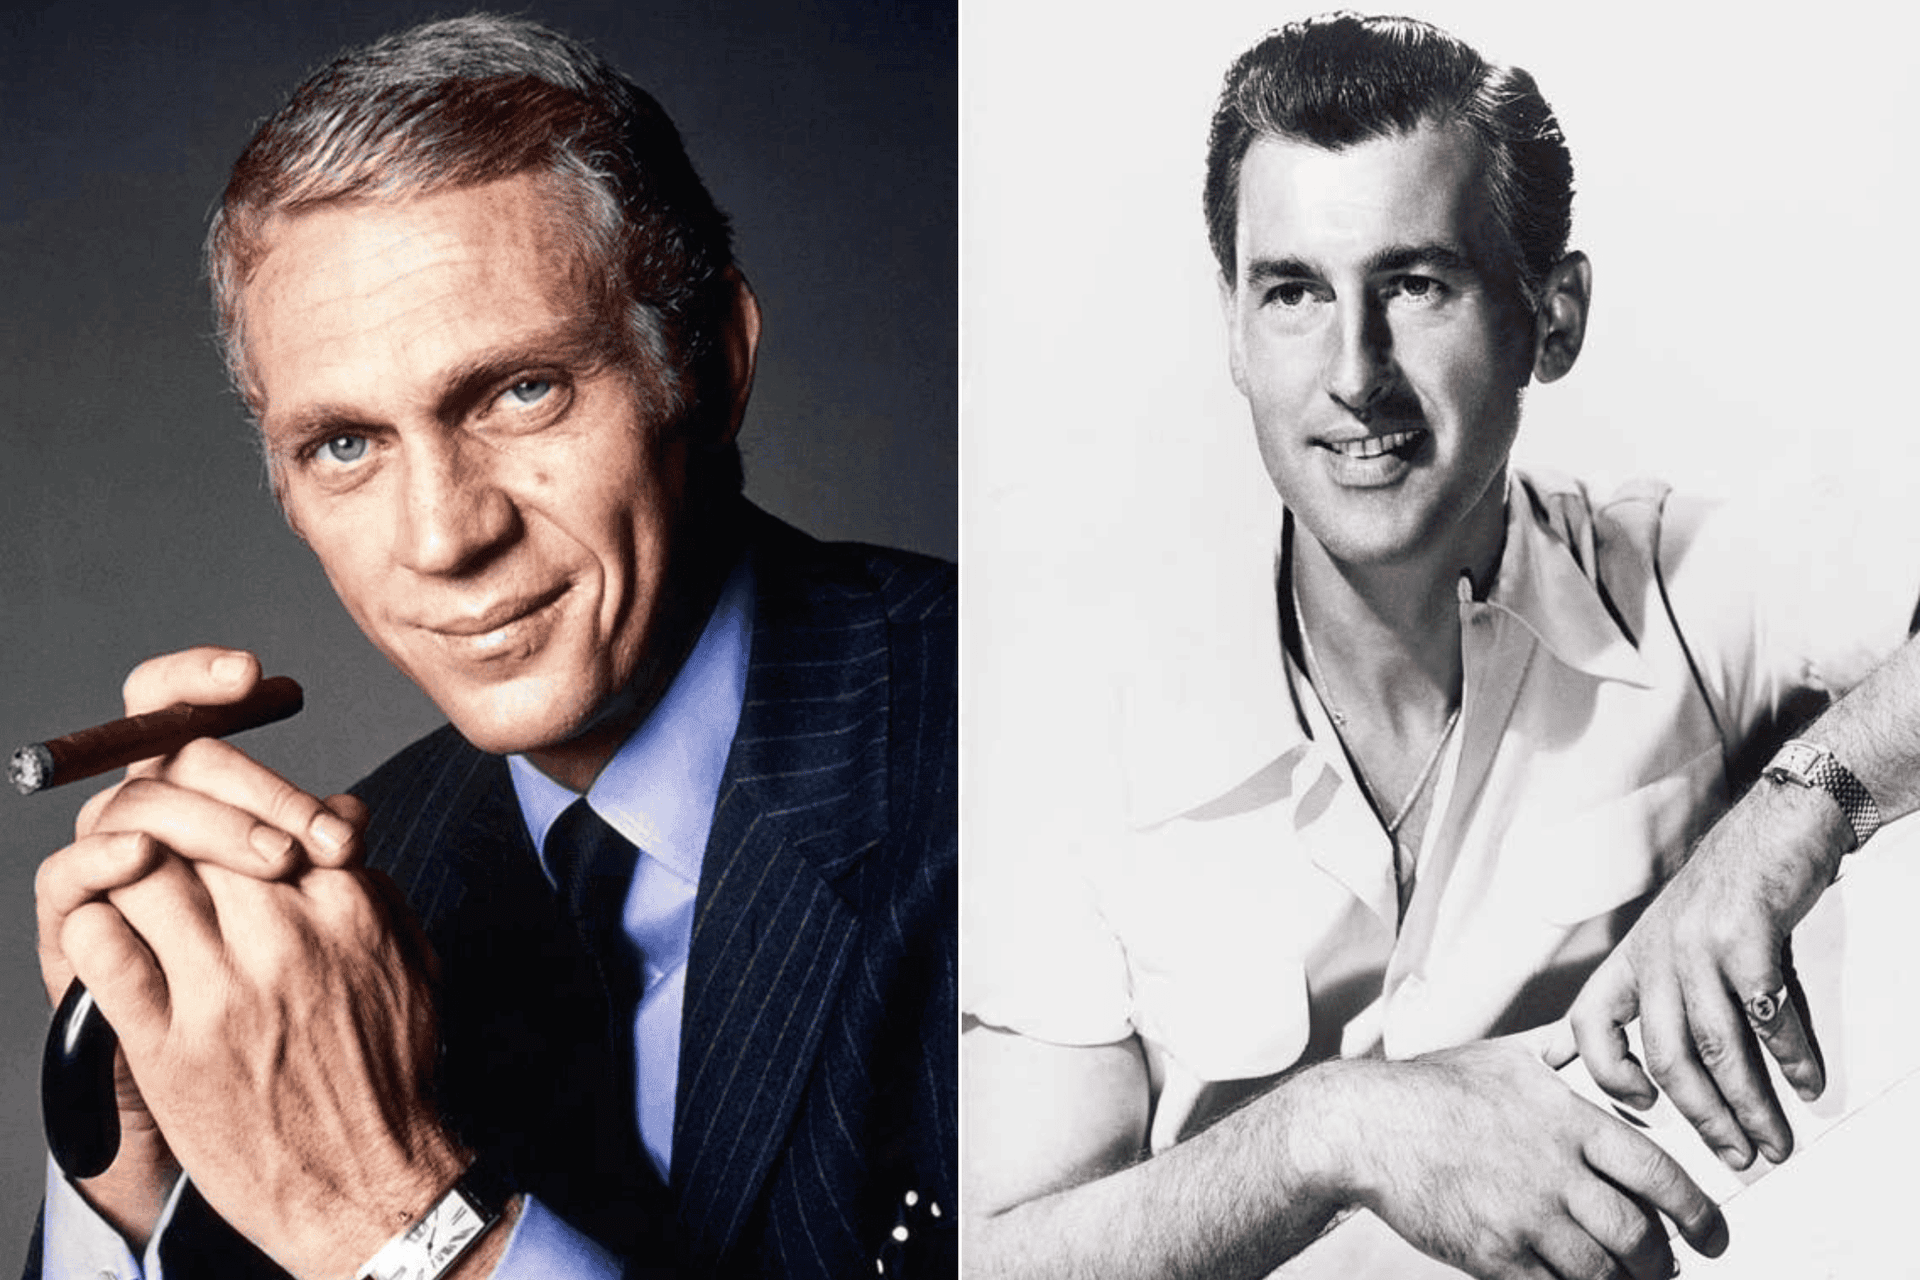 The Cintrée was worn by both Steve McQueen (left) and Stewart Granger (right)